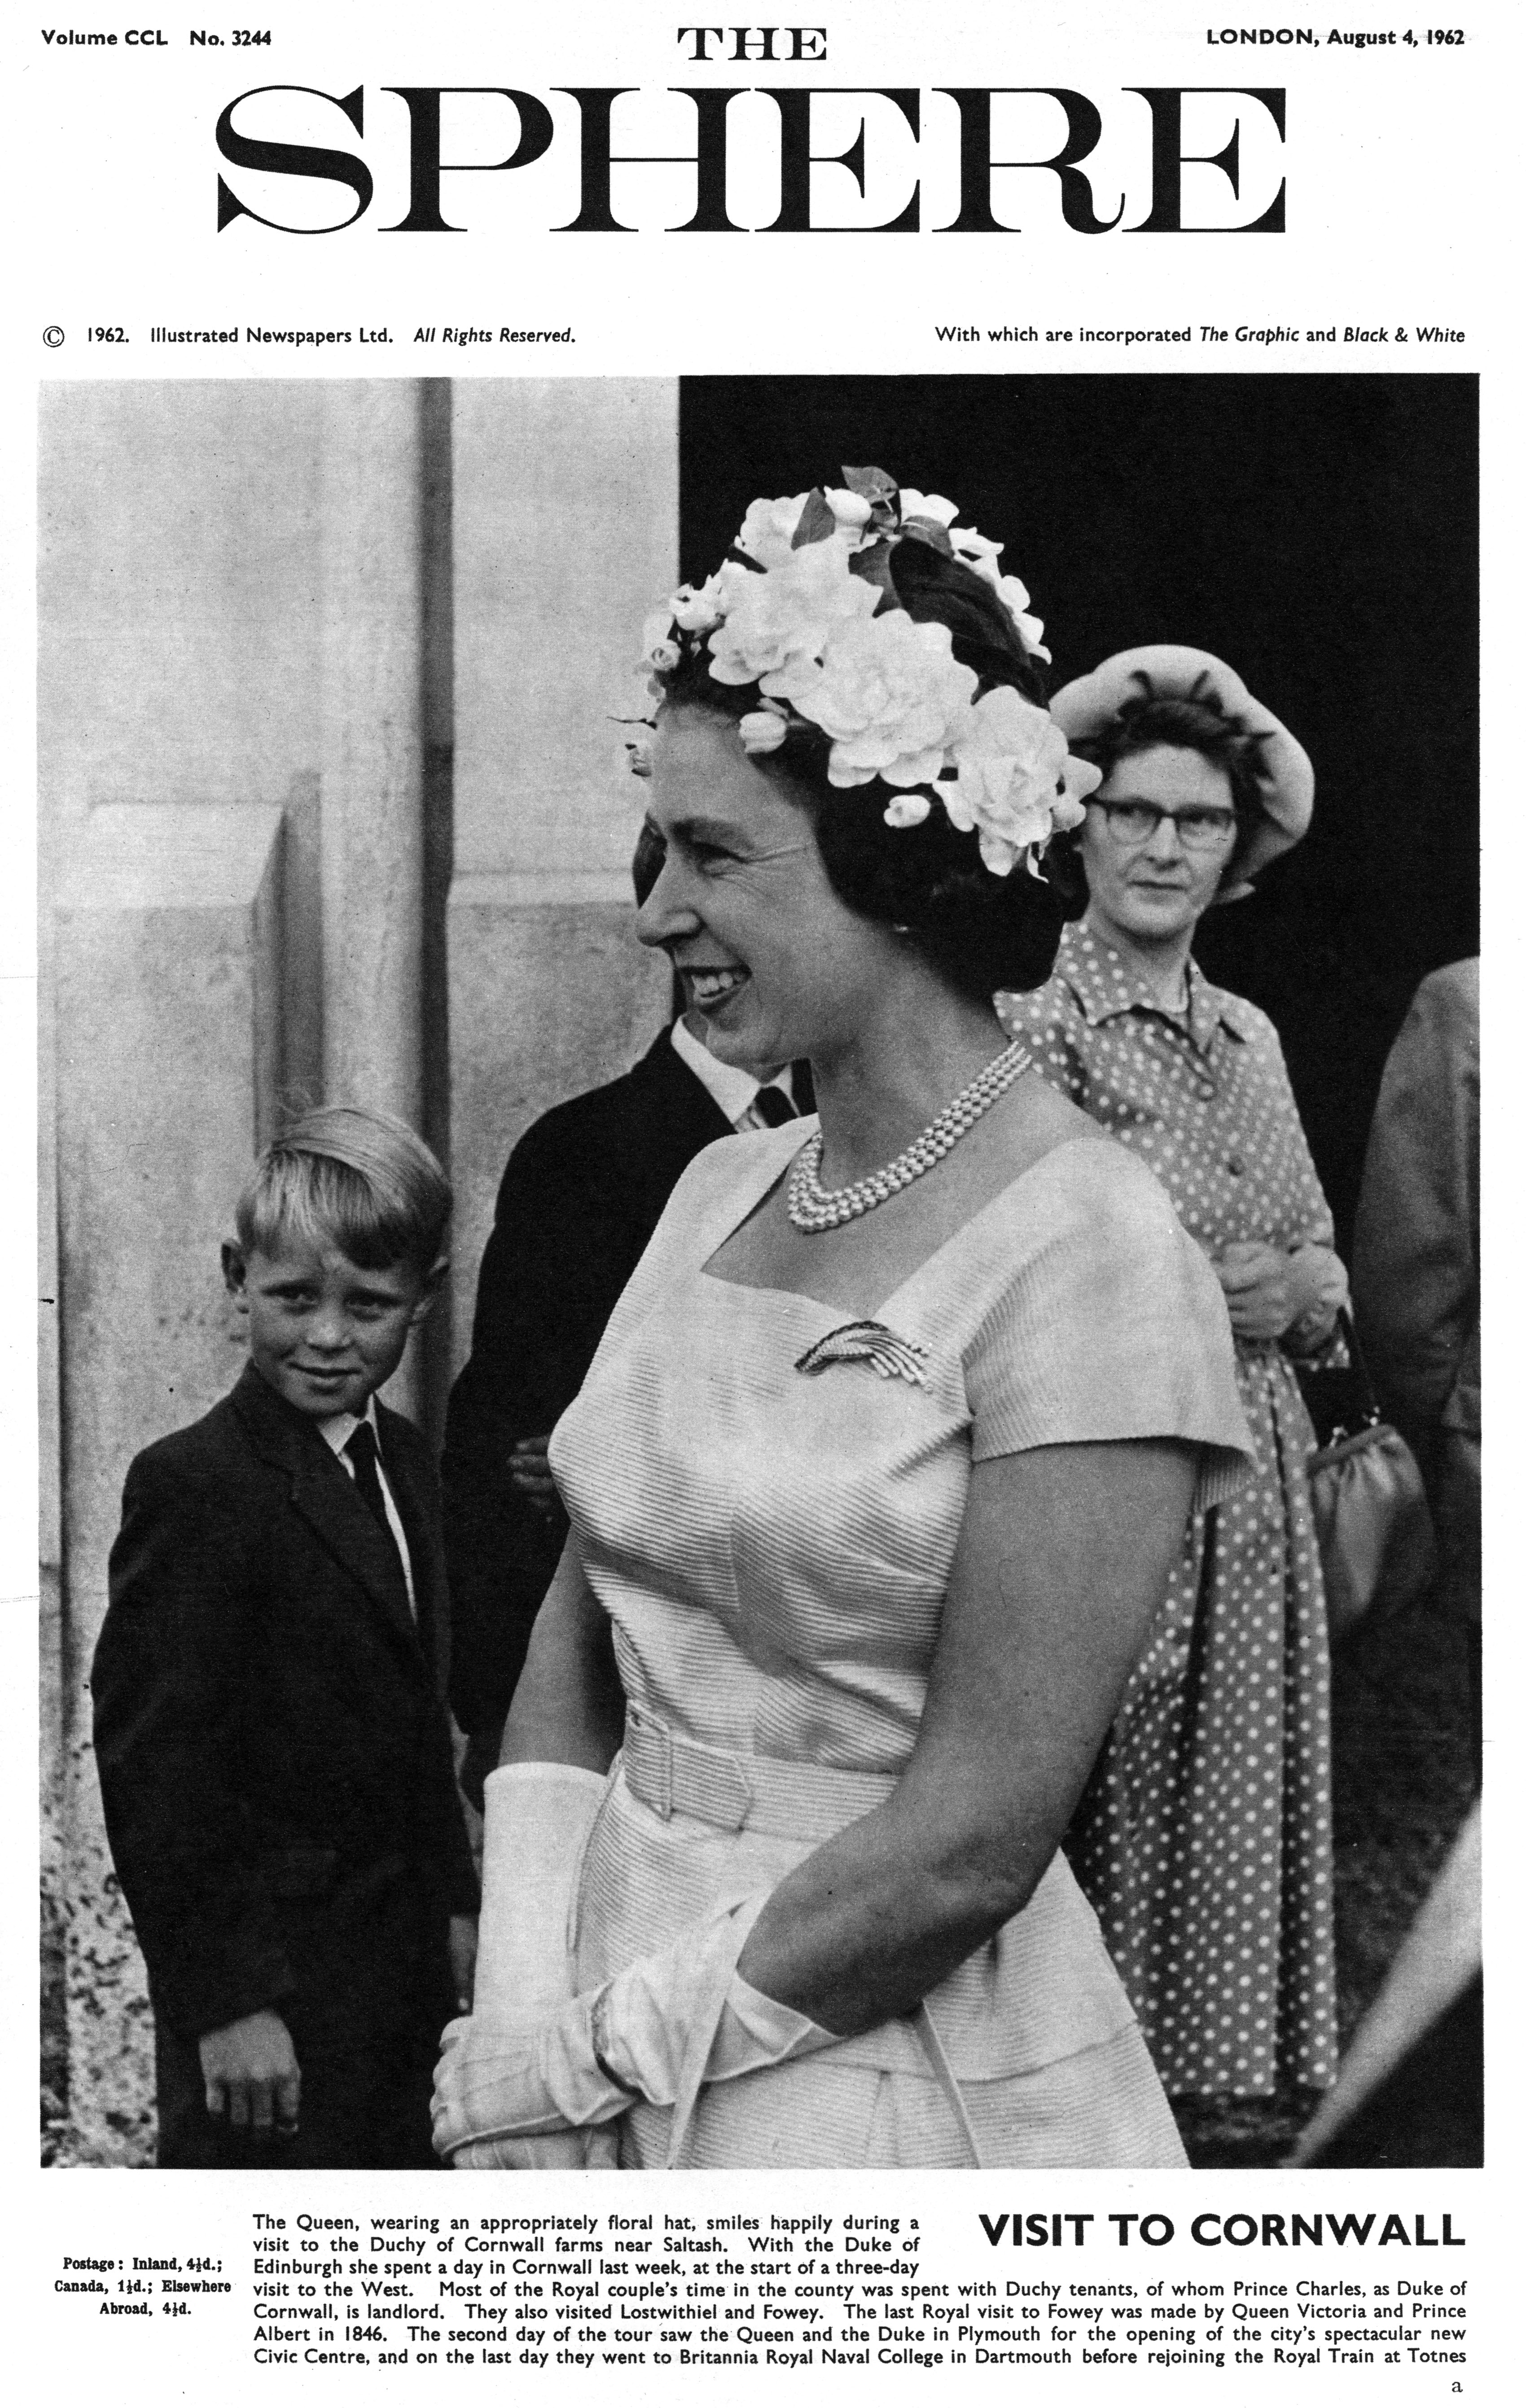 Queen Elizabeth wearing a floral hat visiting Cornwall in 1962